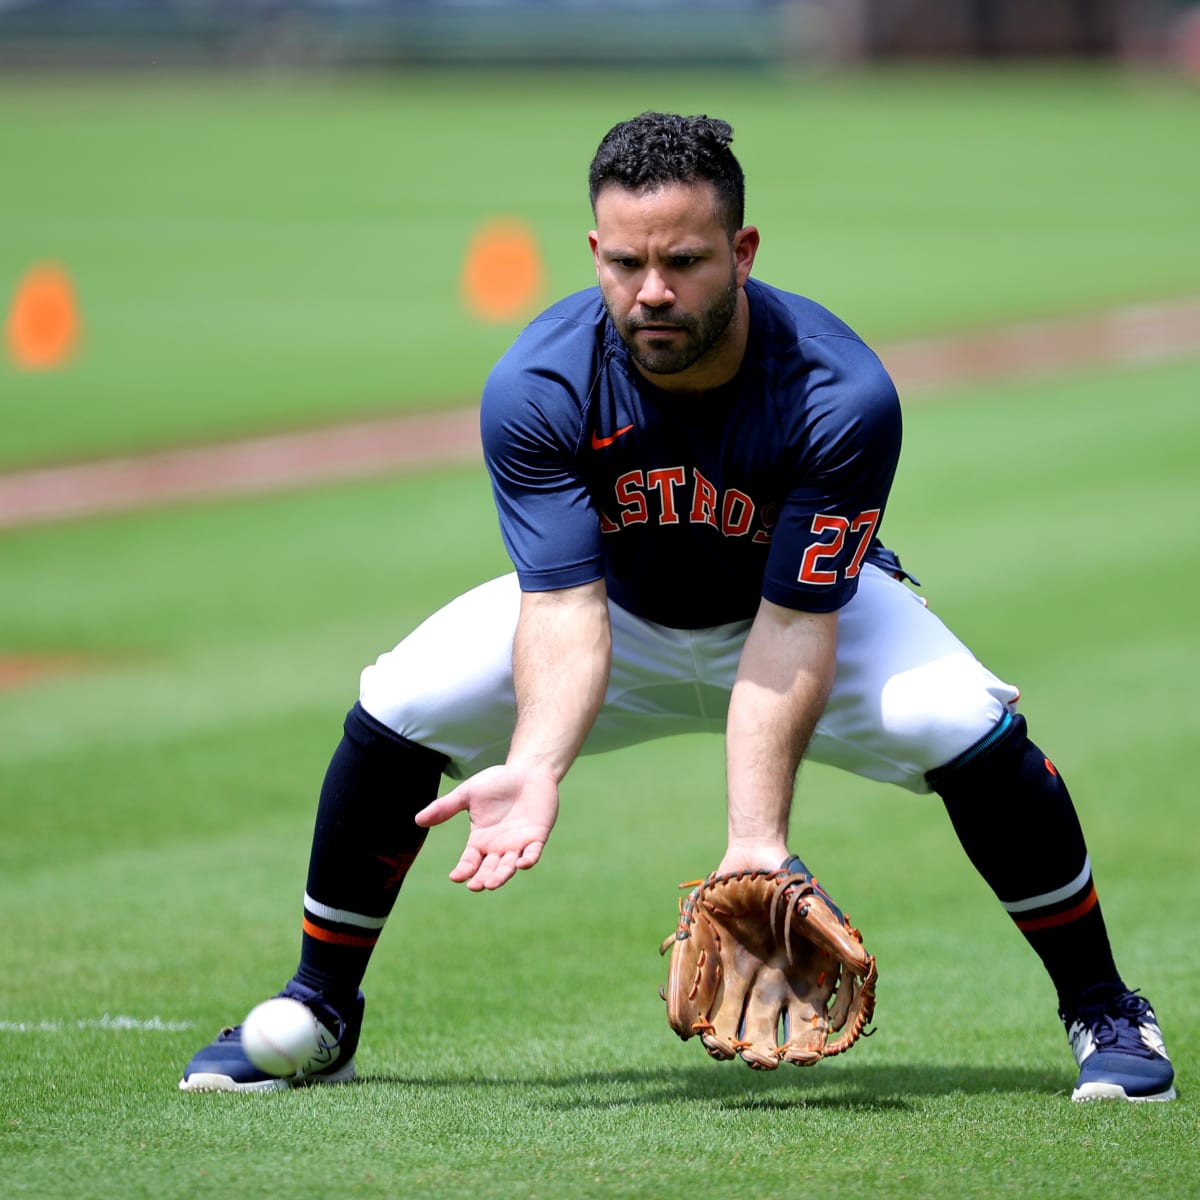 Astros injury update: Latest on Brantley, McCullers, Altuve